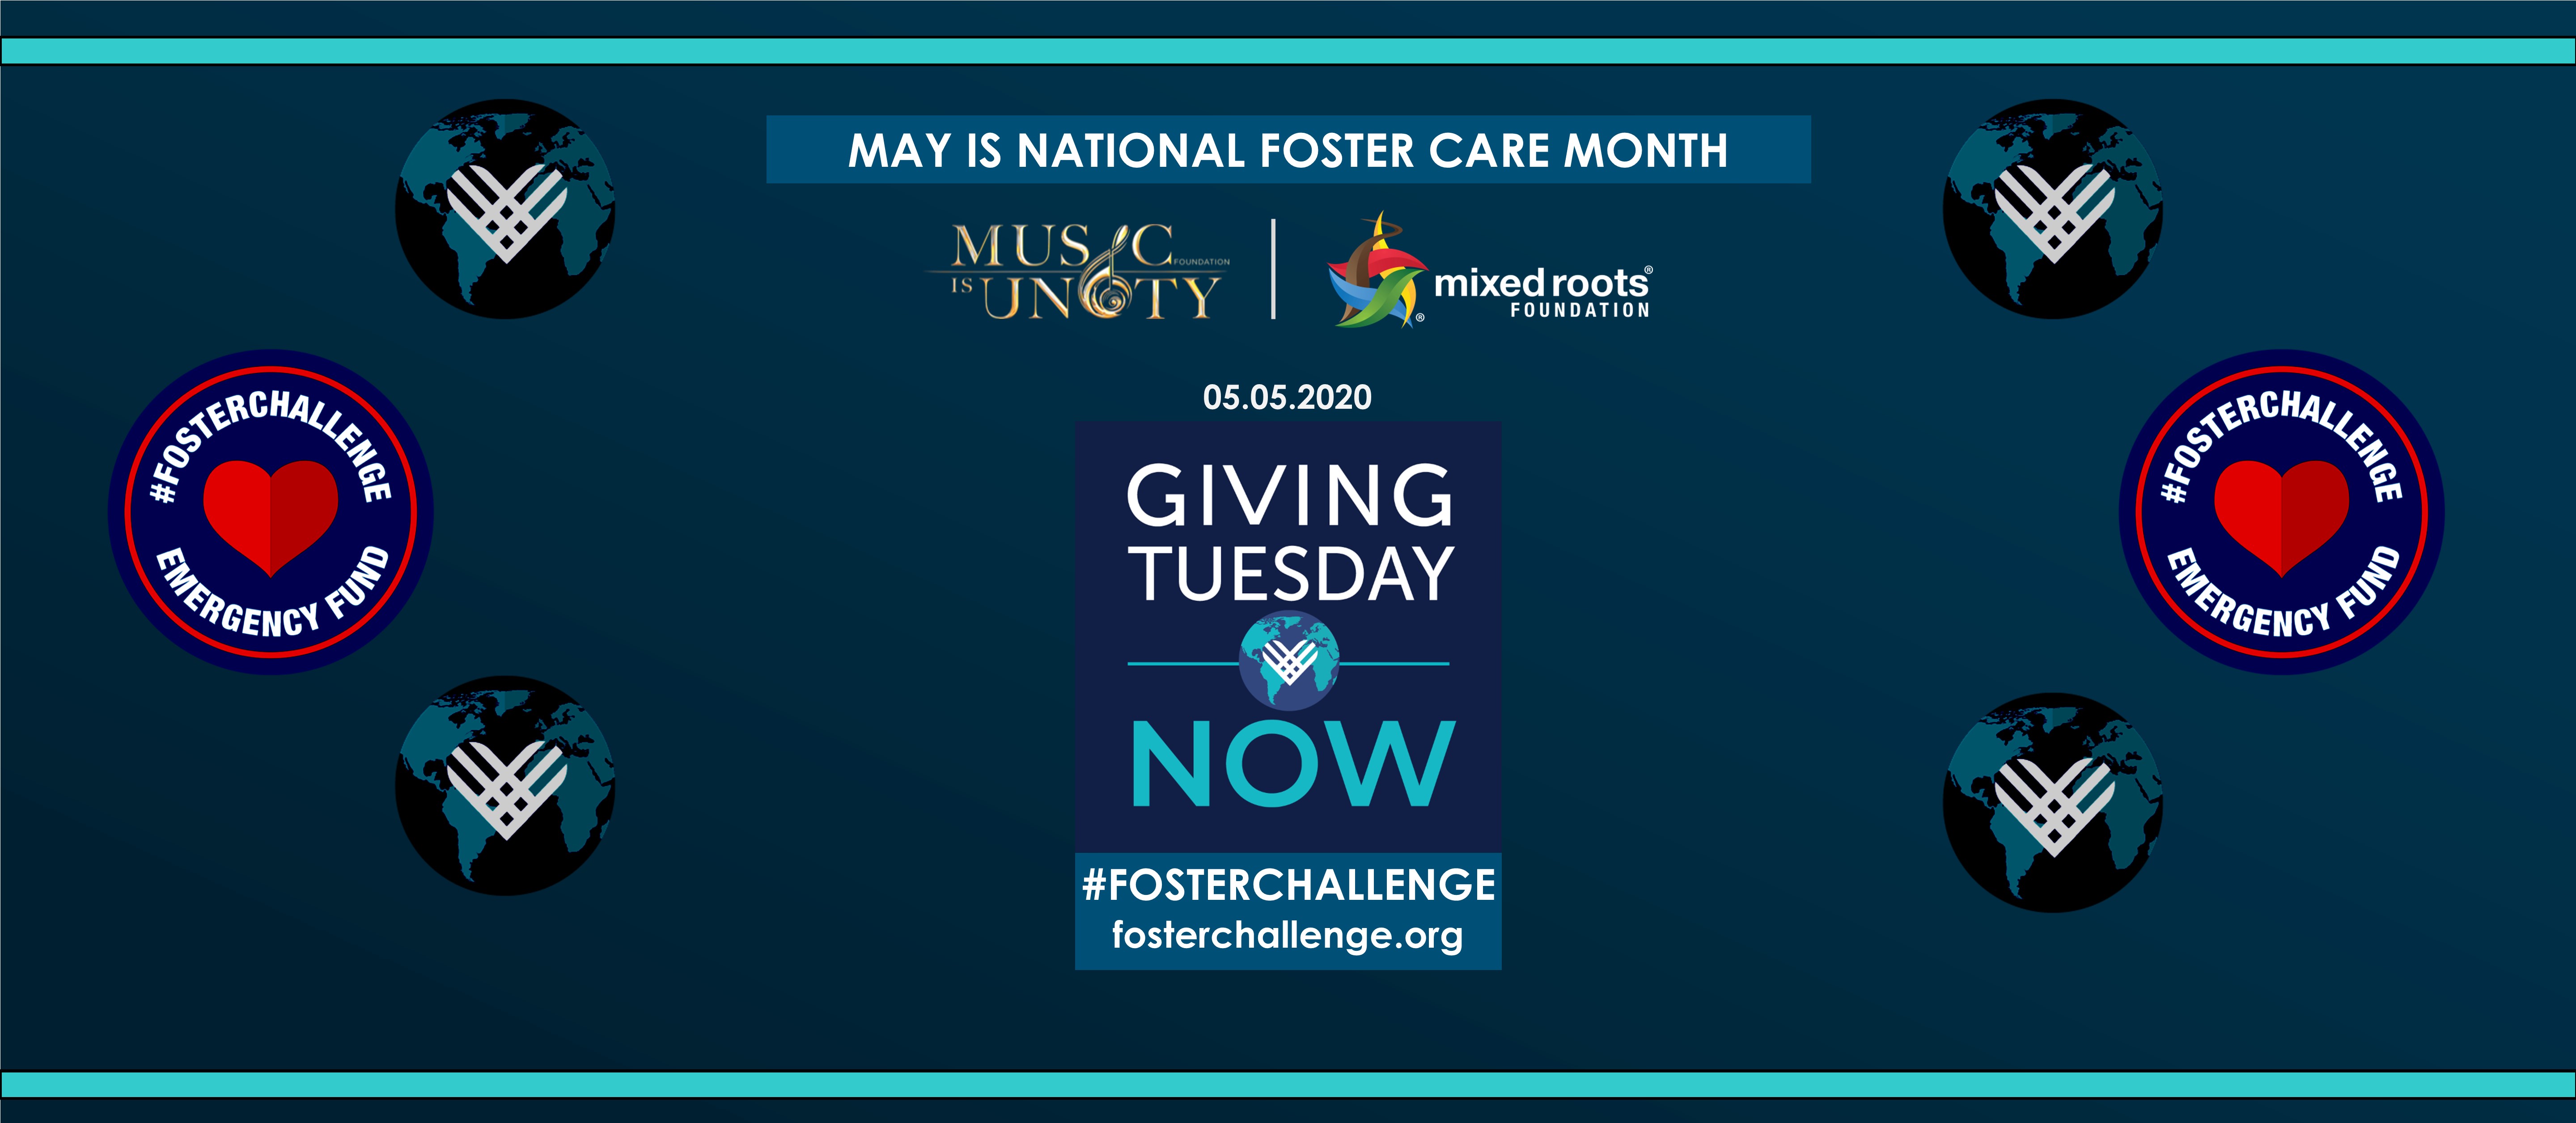 Take the #FosterChallenge on #GivingTuesdayNow - May 5th